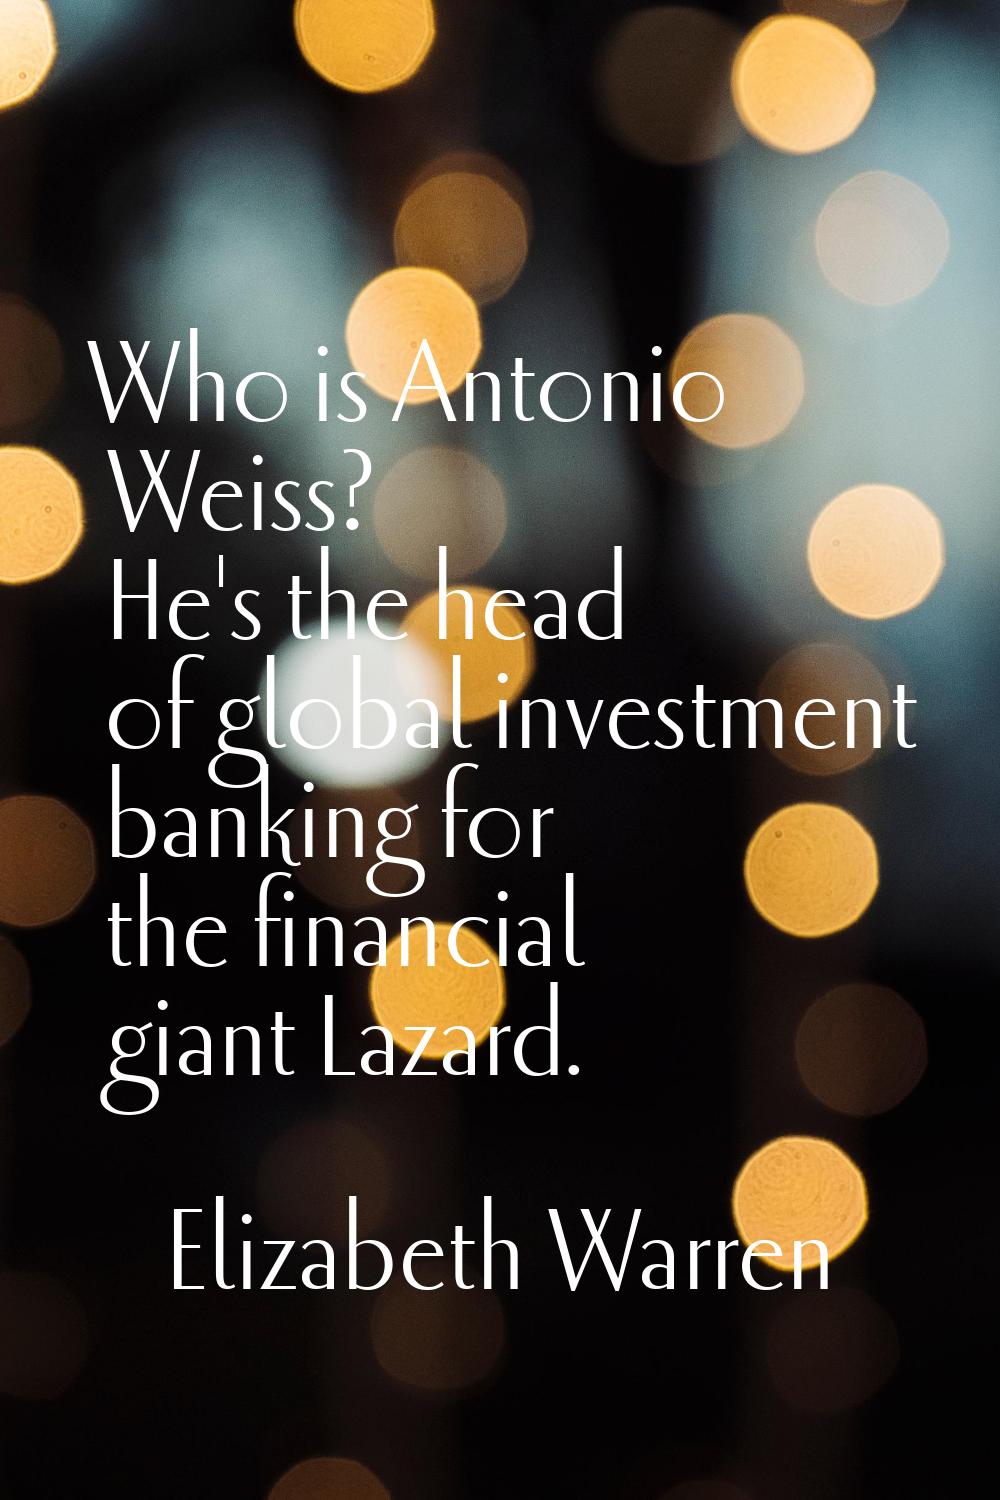 Who is Antonio Weiss? He's the head of global investment banking for the financial giant Lazard.